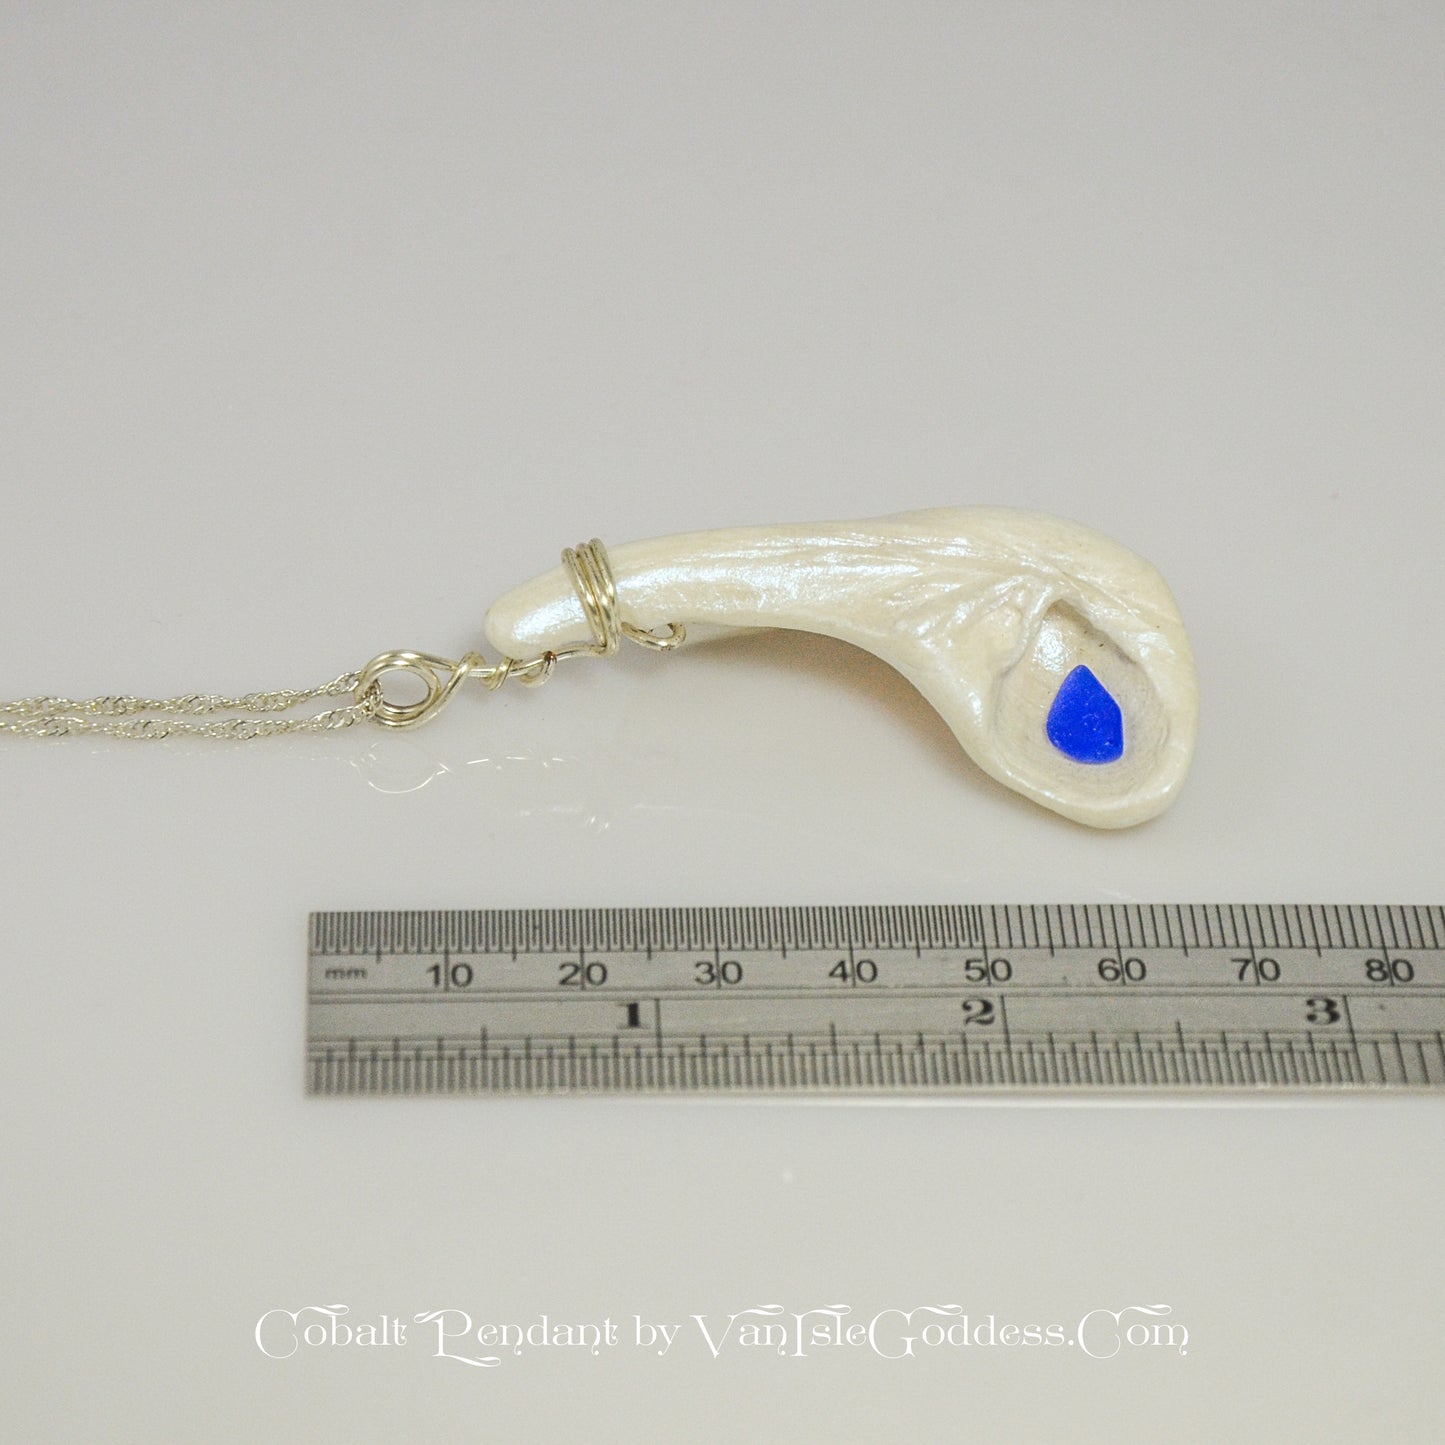 The cobalt pendant is shown on its side along a ruler so the viewer can see the length of the pendant.